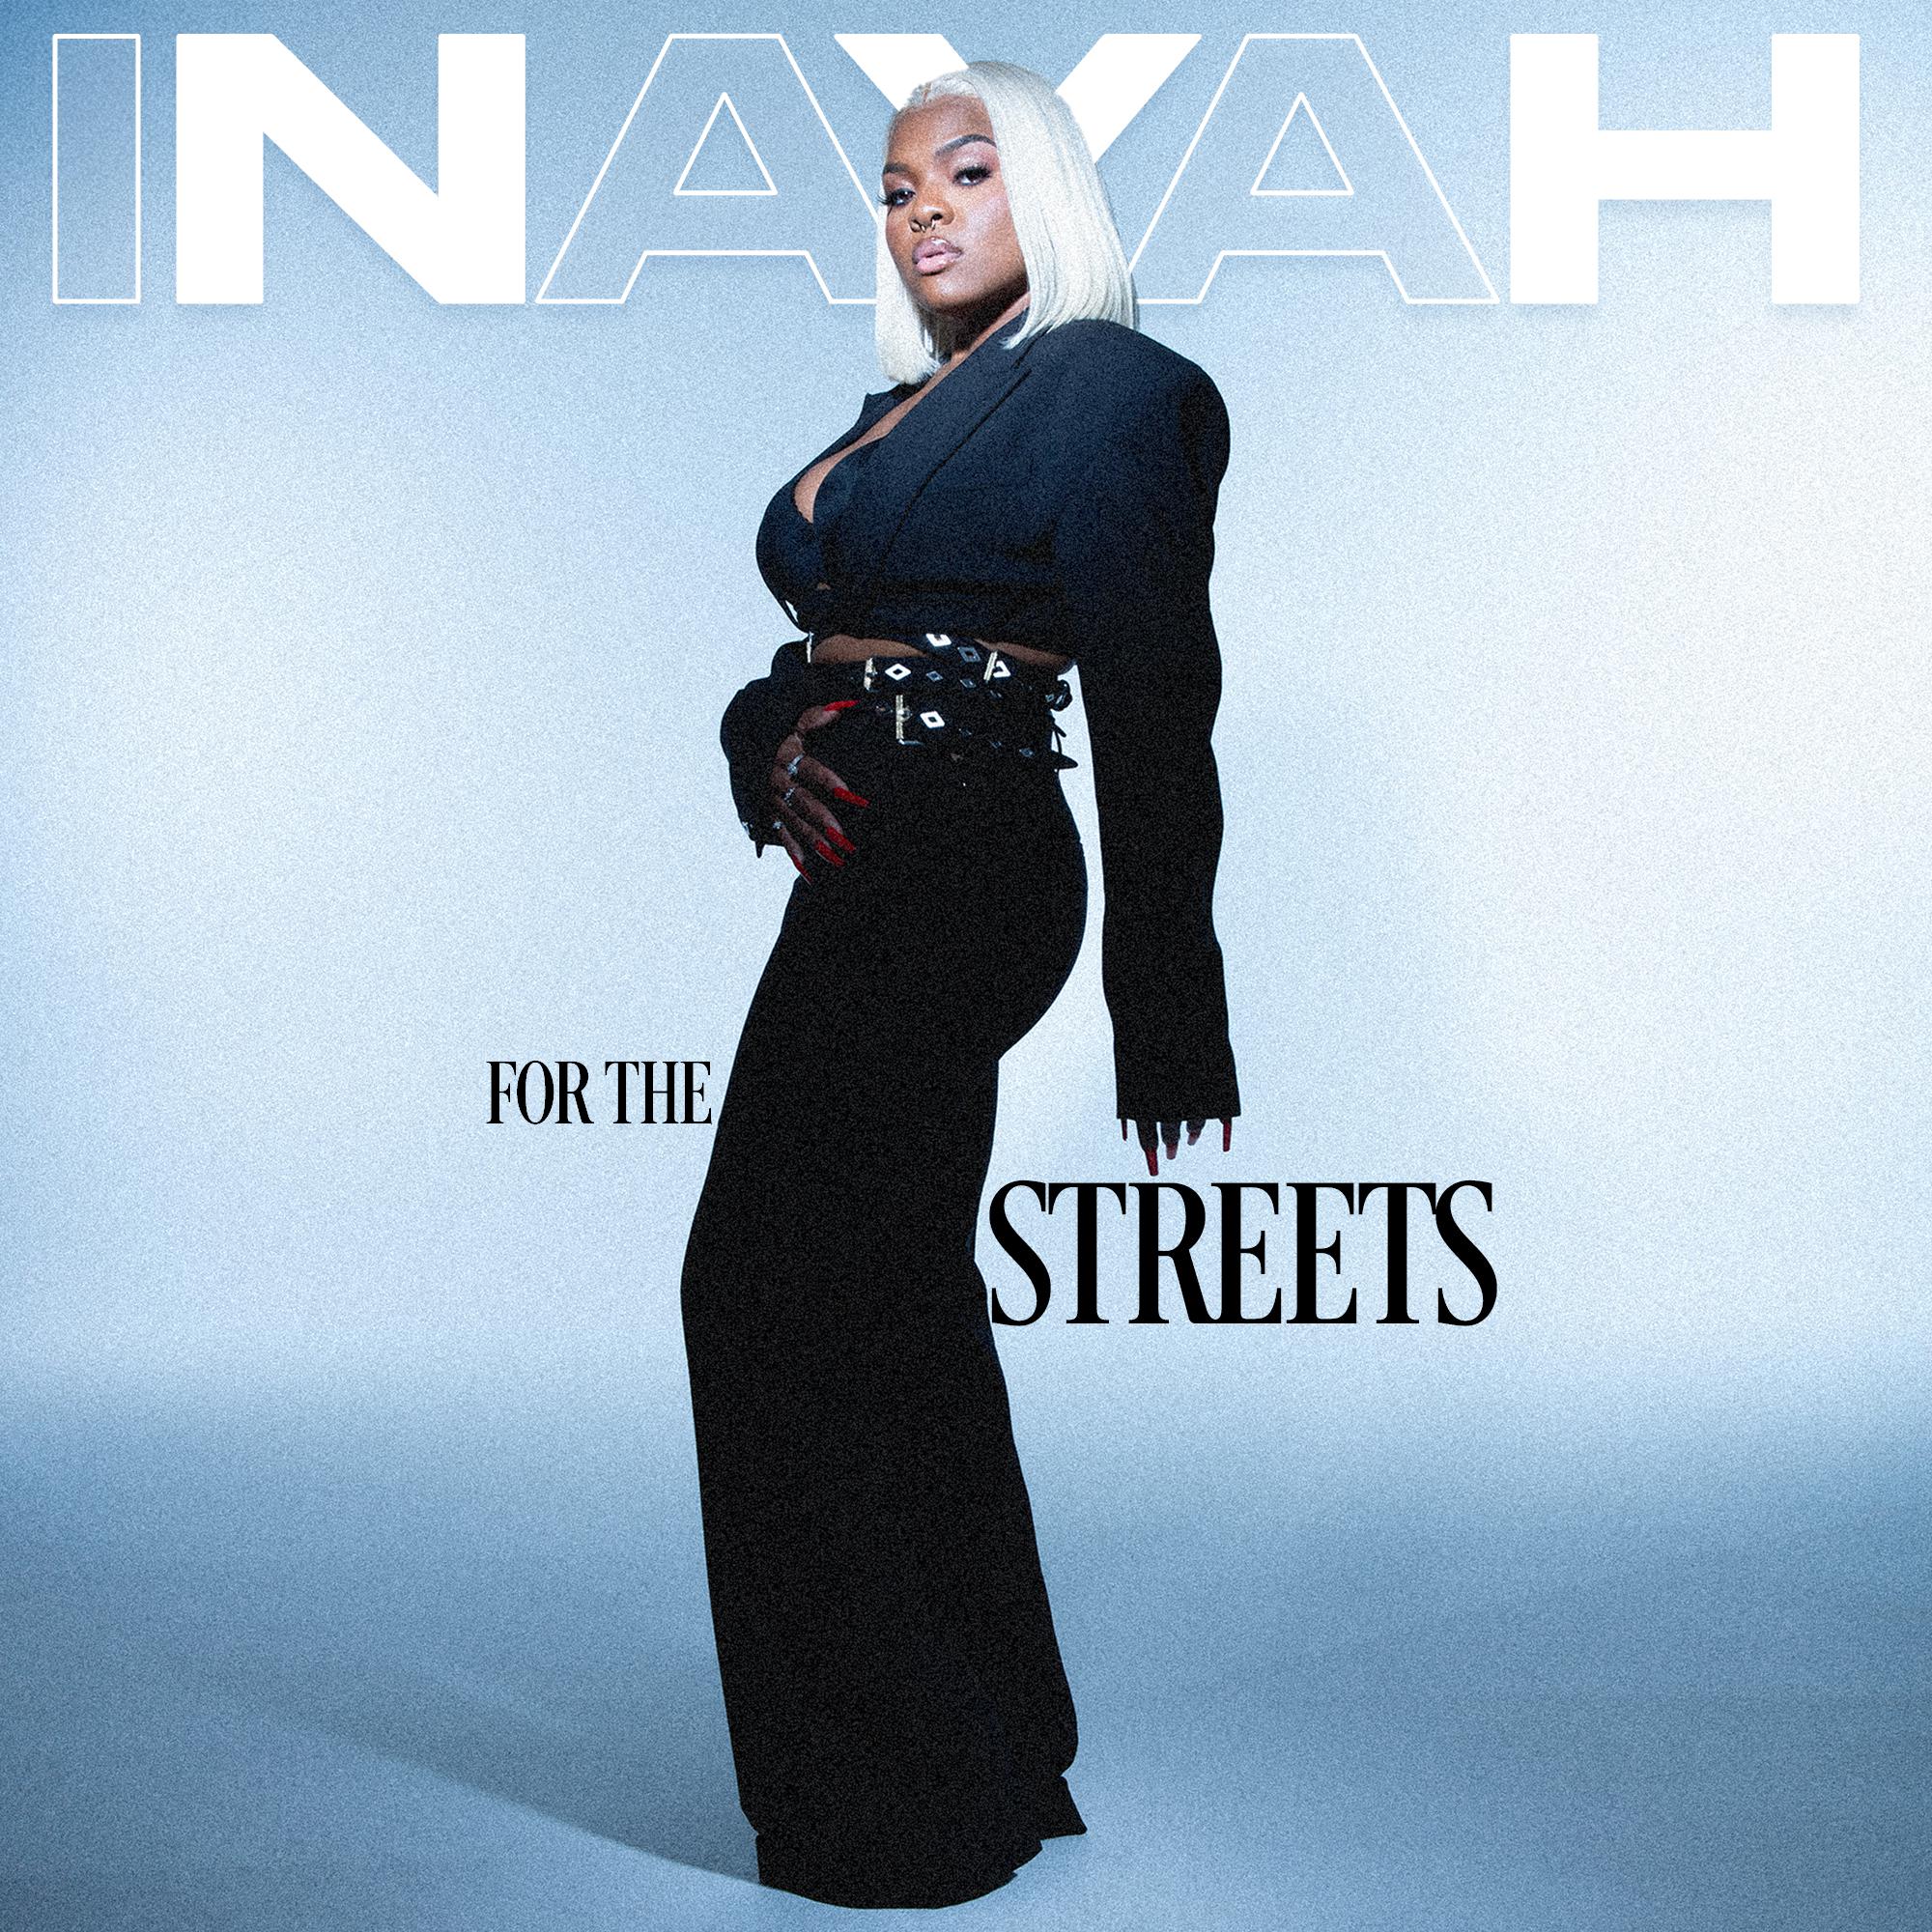 Inayah - For The Streets